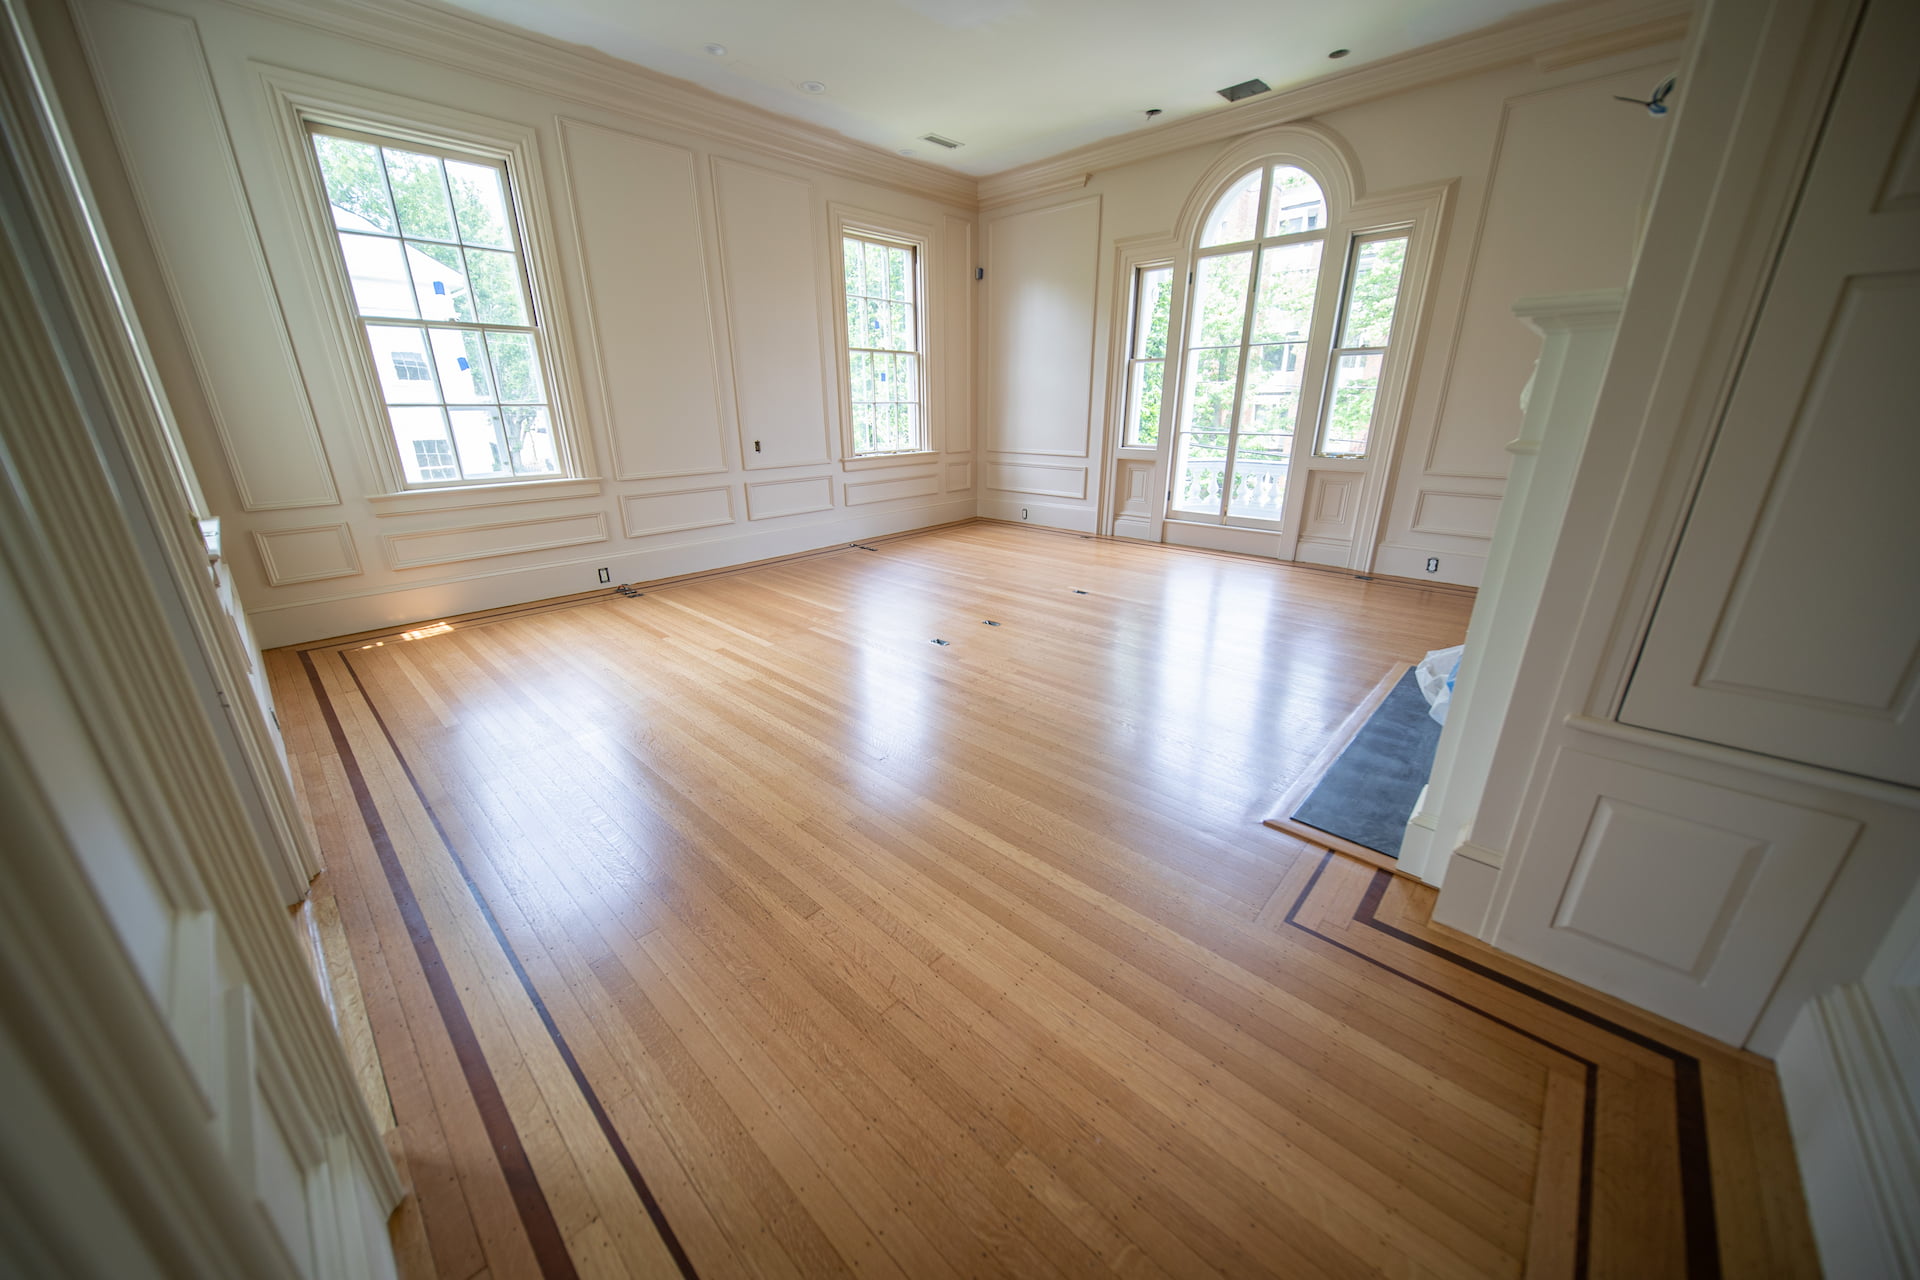 Elegant living room featuring newly refinished hardwood floors by Weles, surrounded by classic white wall paneling and expansive windows that flood the room with natural light.